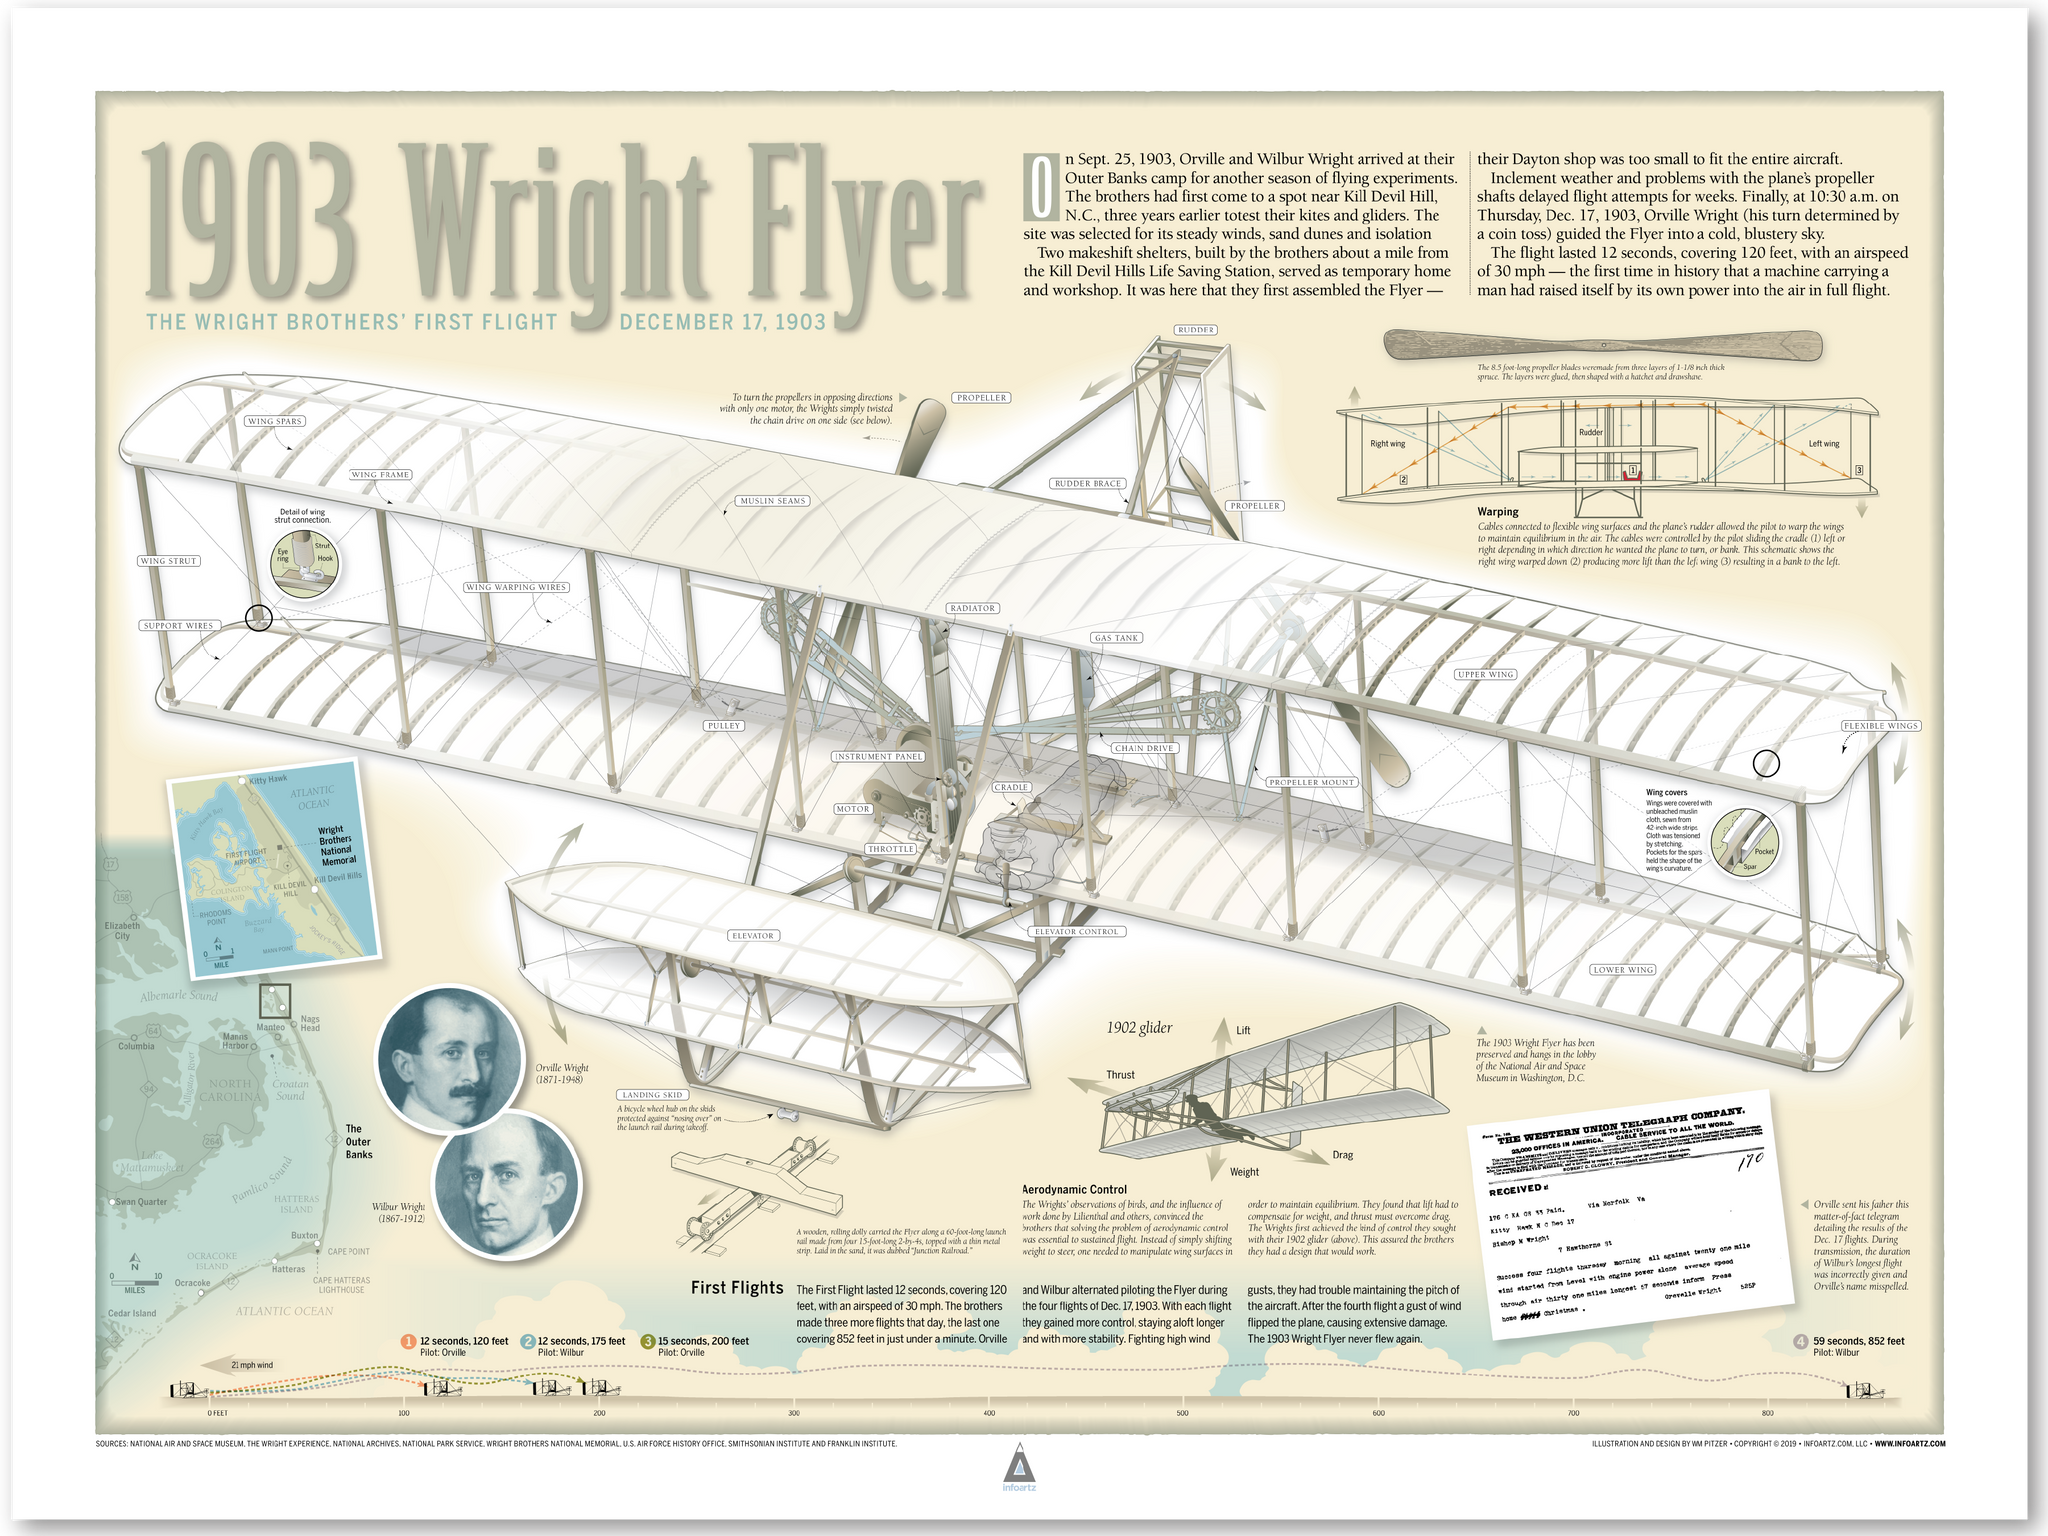 1903 Wright Flyer Infographic Print (24 x 18)